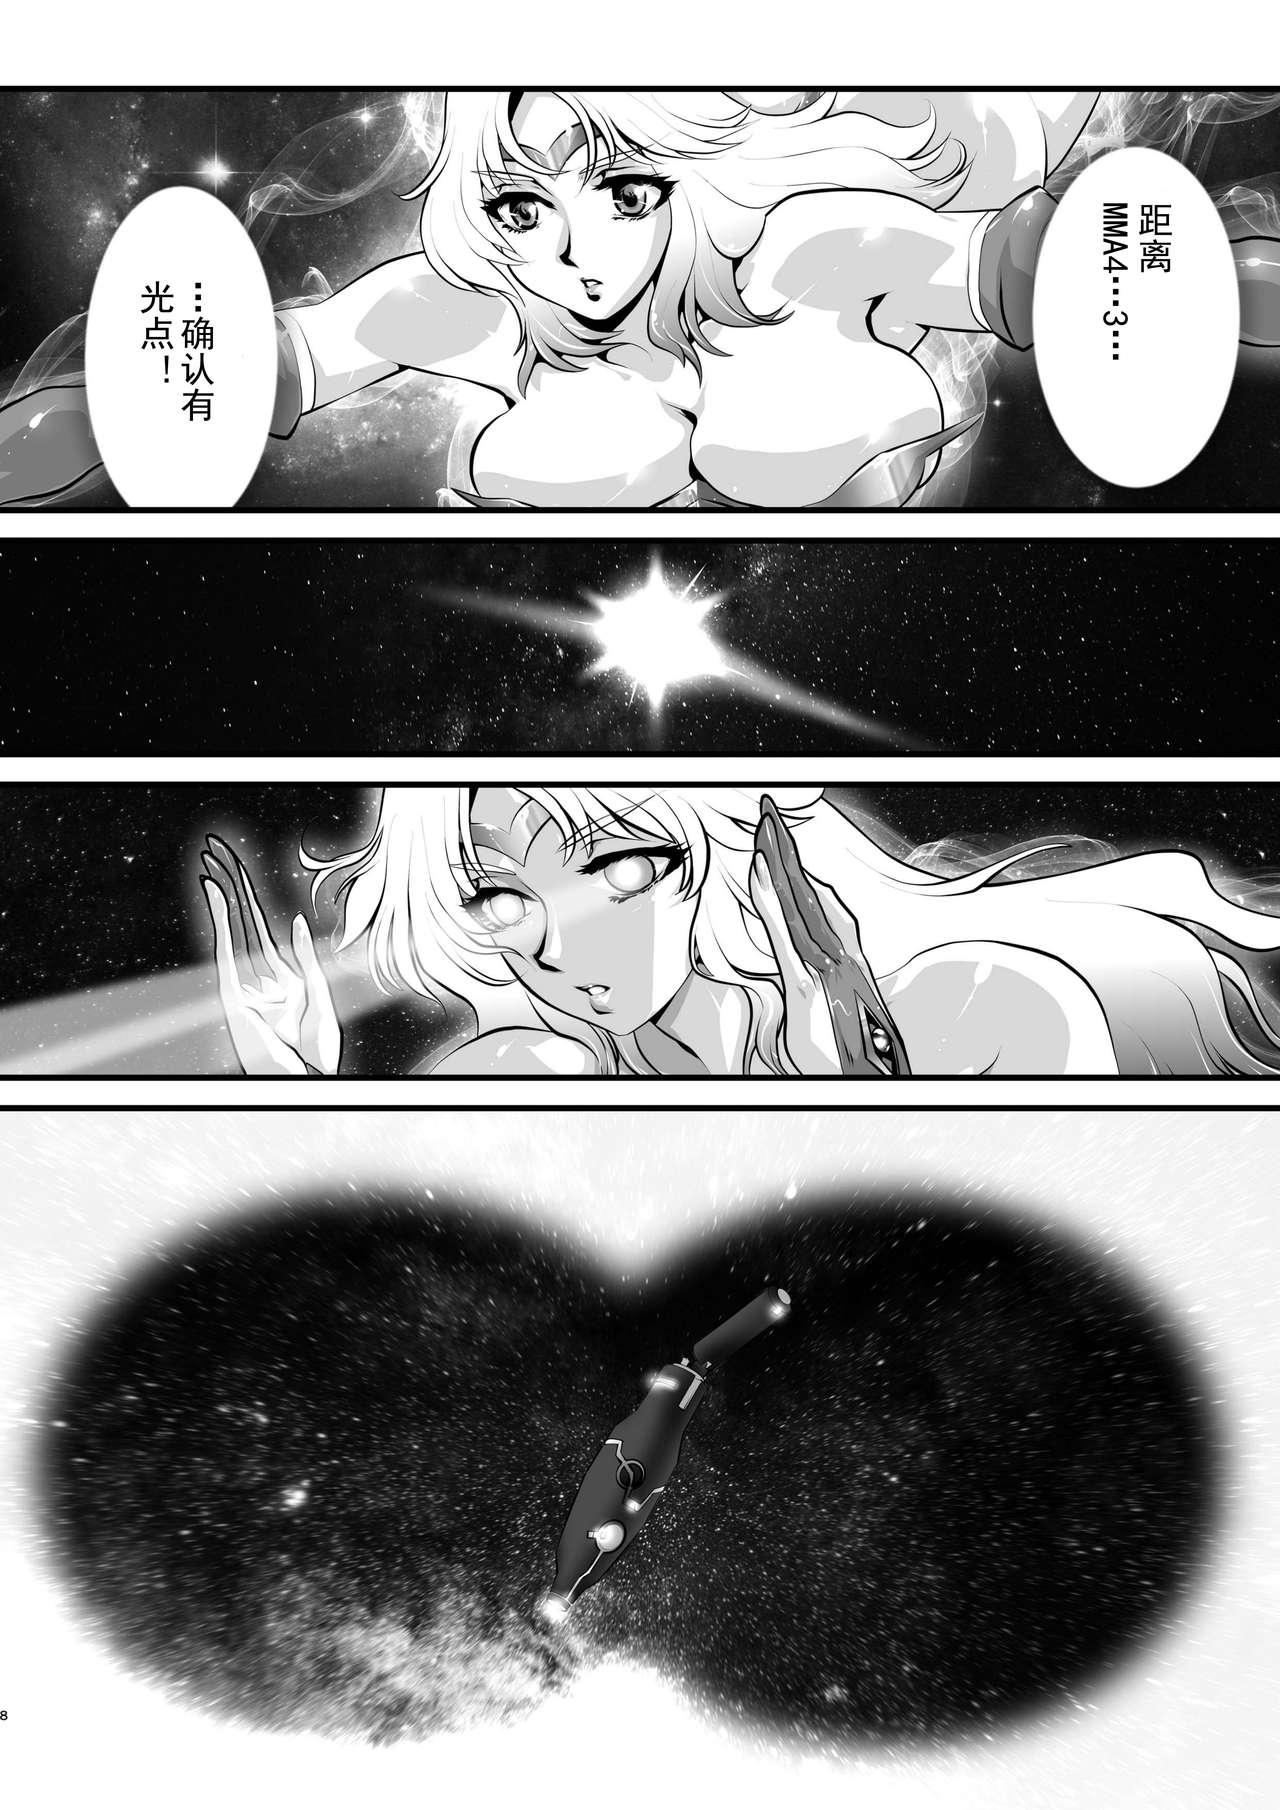 Blackmail LUVLADY Encounter with jewel - Ultraman Screaming - Page 8